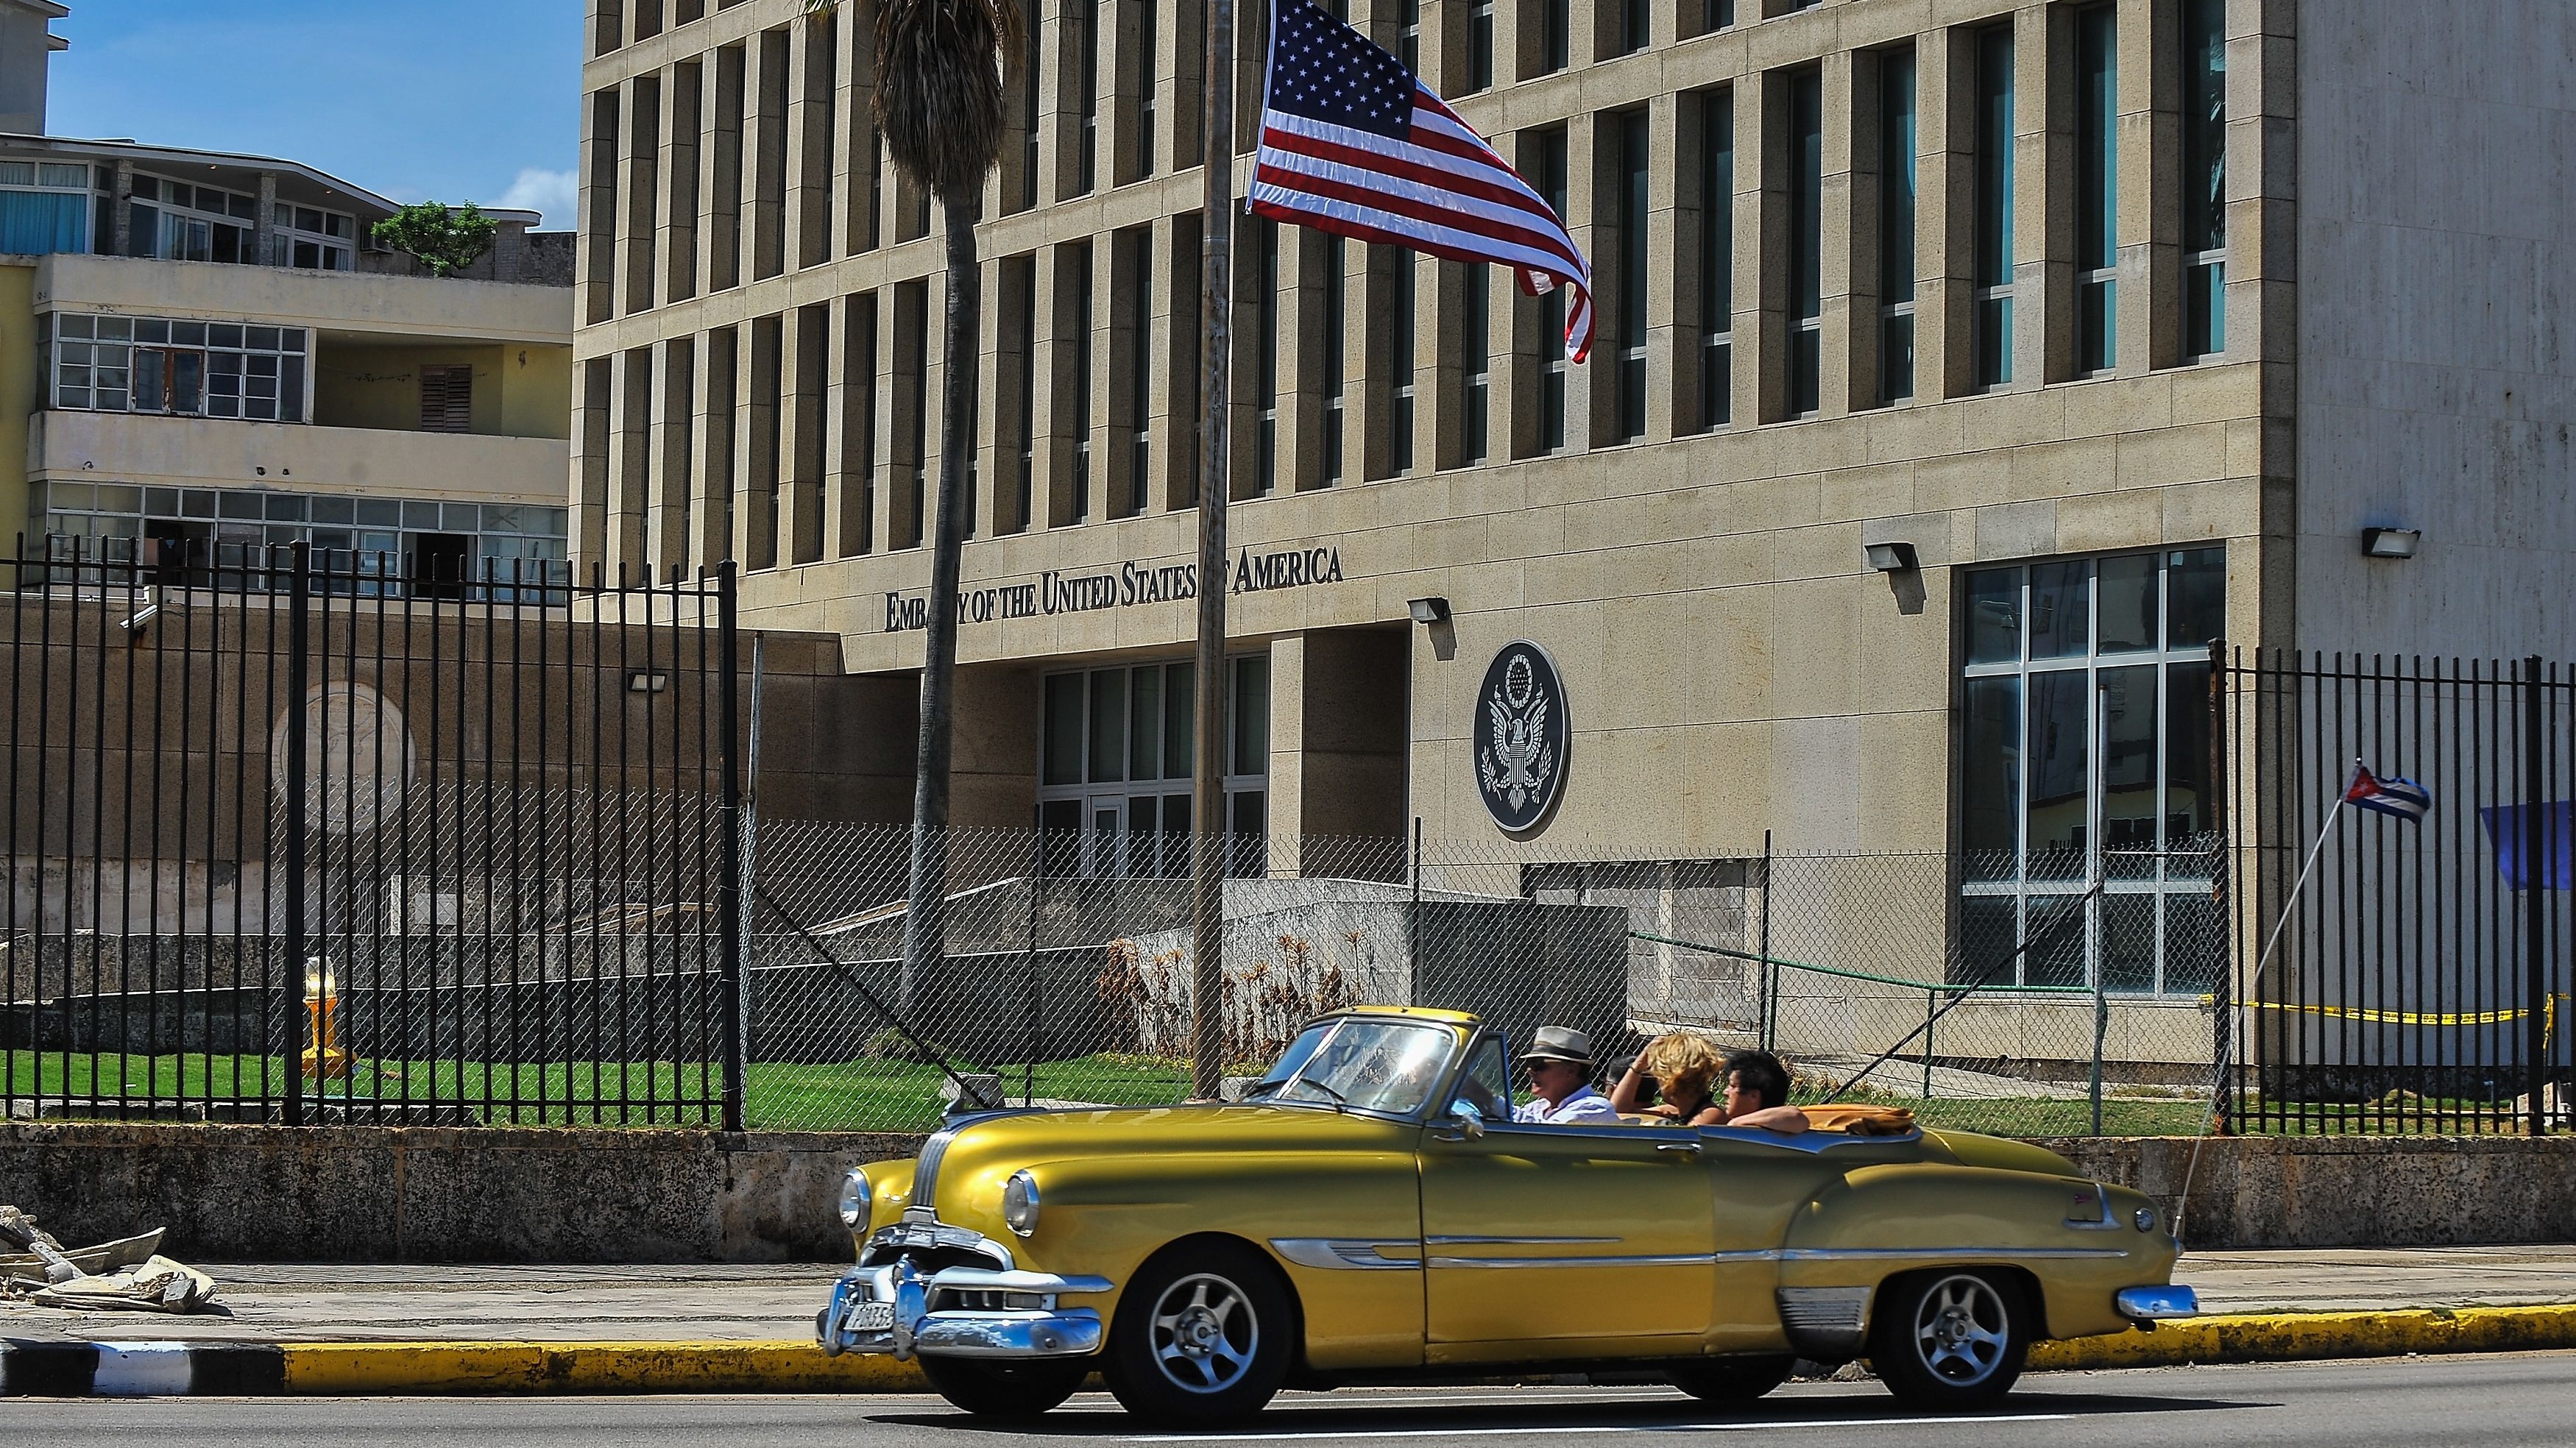 Cases were first reported at the US embassy in Cuba